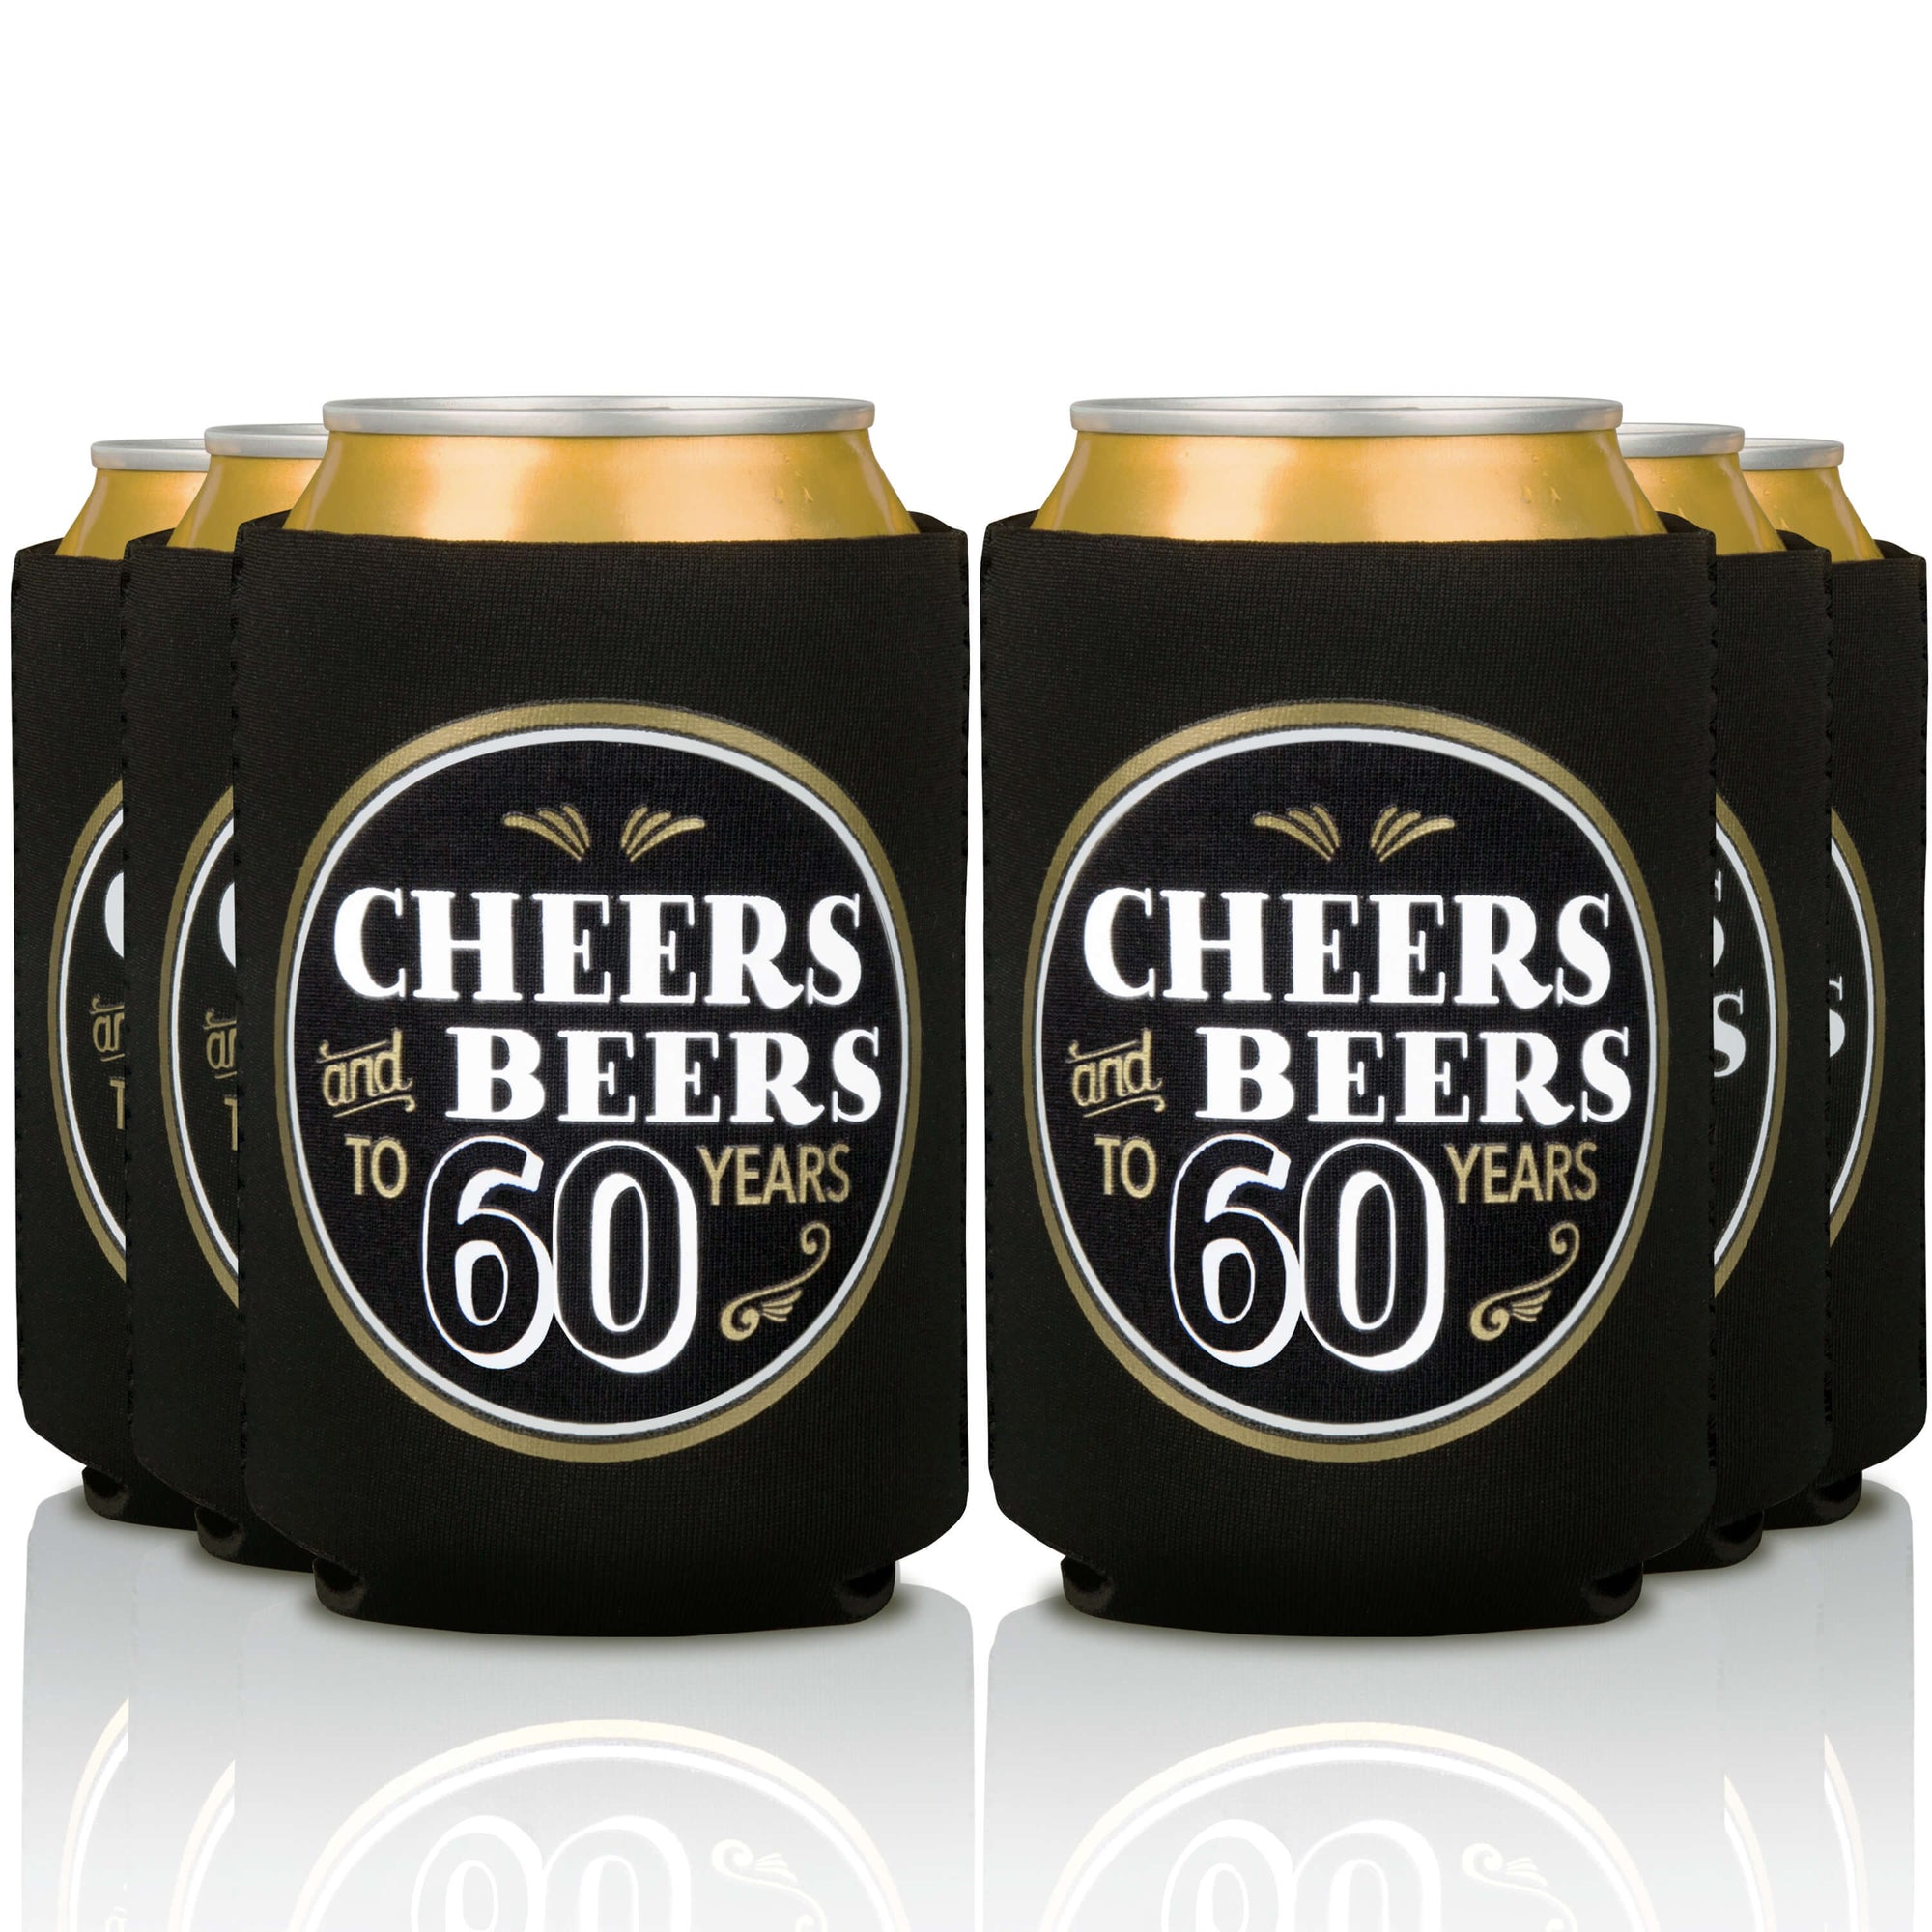 Cheers and Beers to 60 Years Coozies (12-Pack)